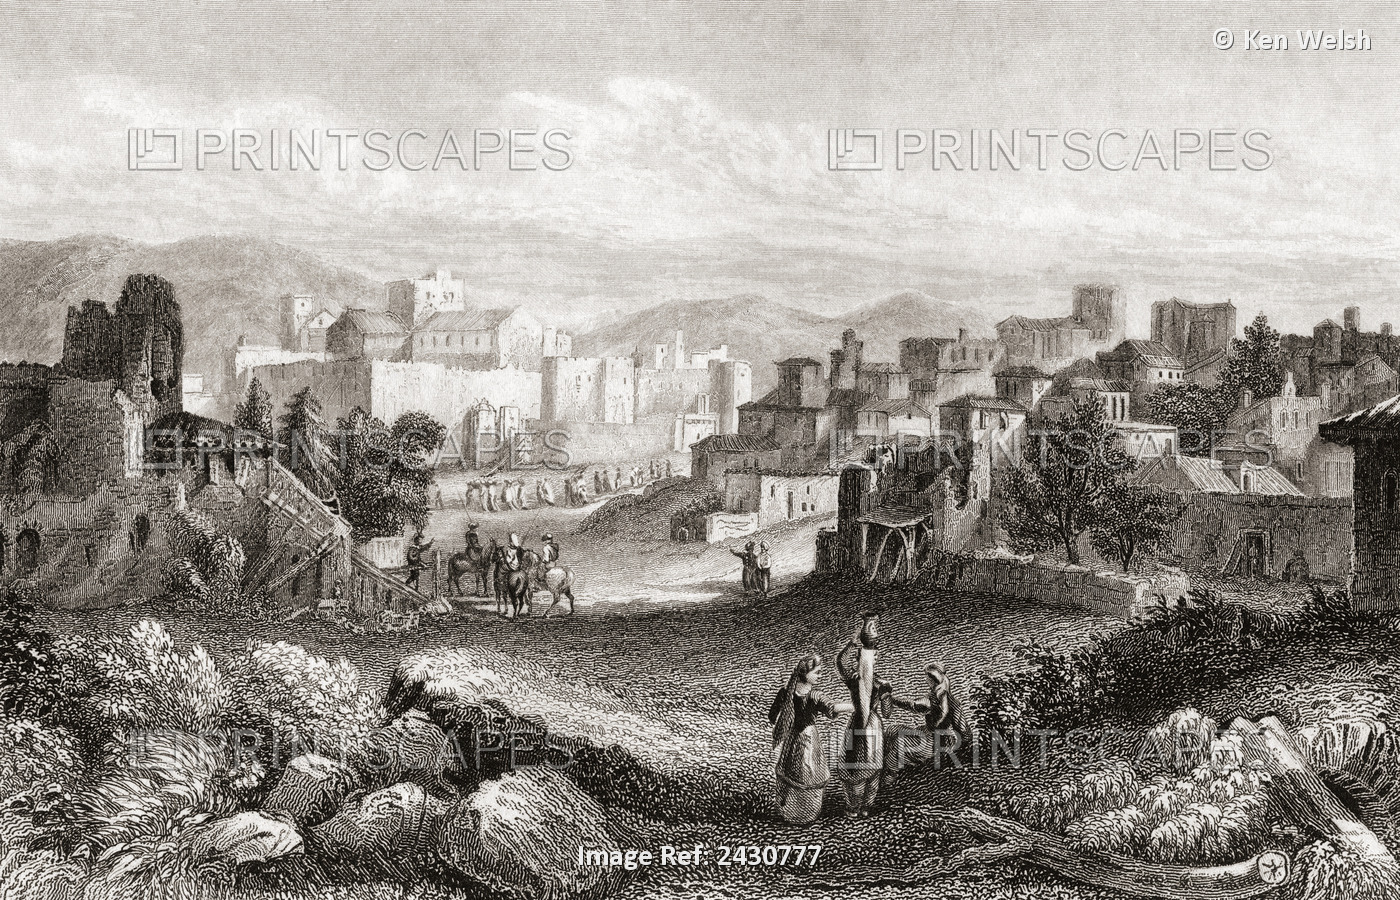 Bethlehem, Palestine In The 19th Century. From A 19th Century Print.